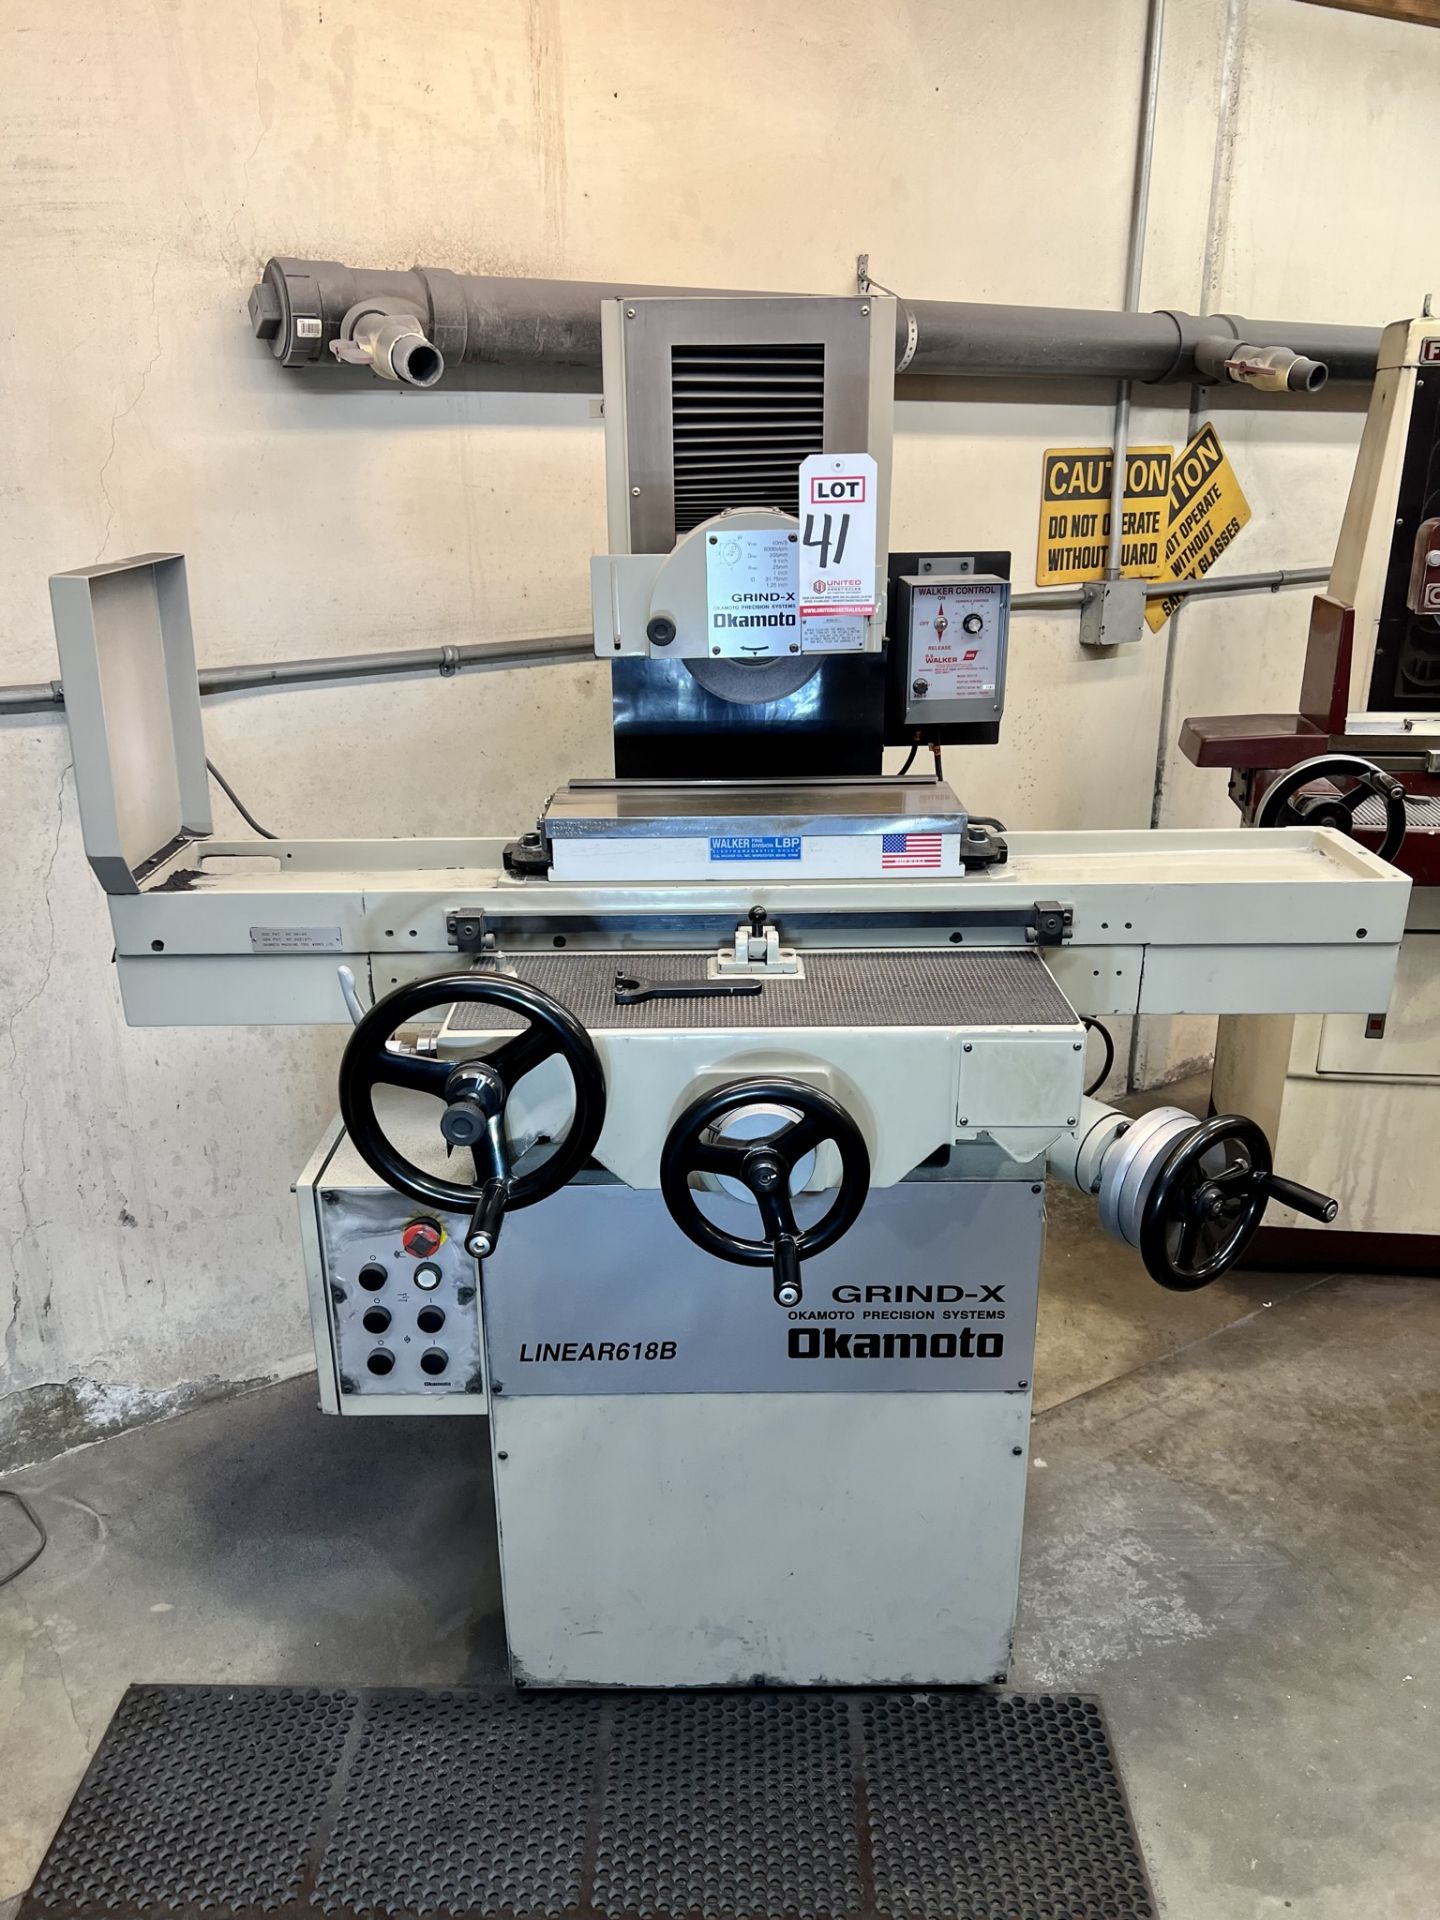 2018 OKAMOTO LINEAR 618B SURFACE GRINDER, S/N 48824, W/ WALKER 18" X 6" MAGNETIC CHUCK AND CONTROLS,